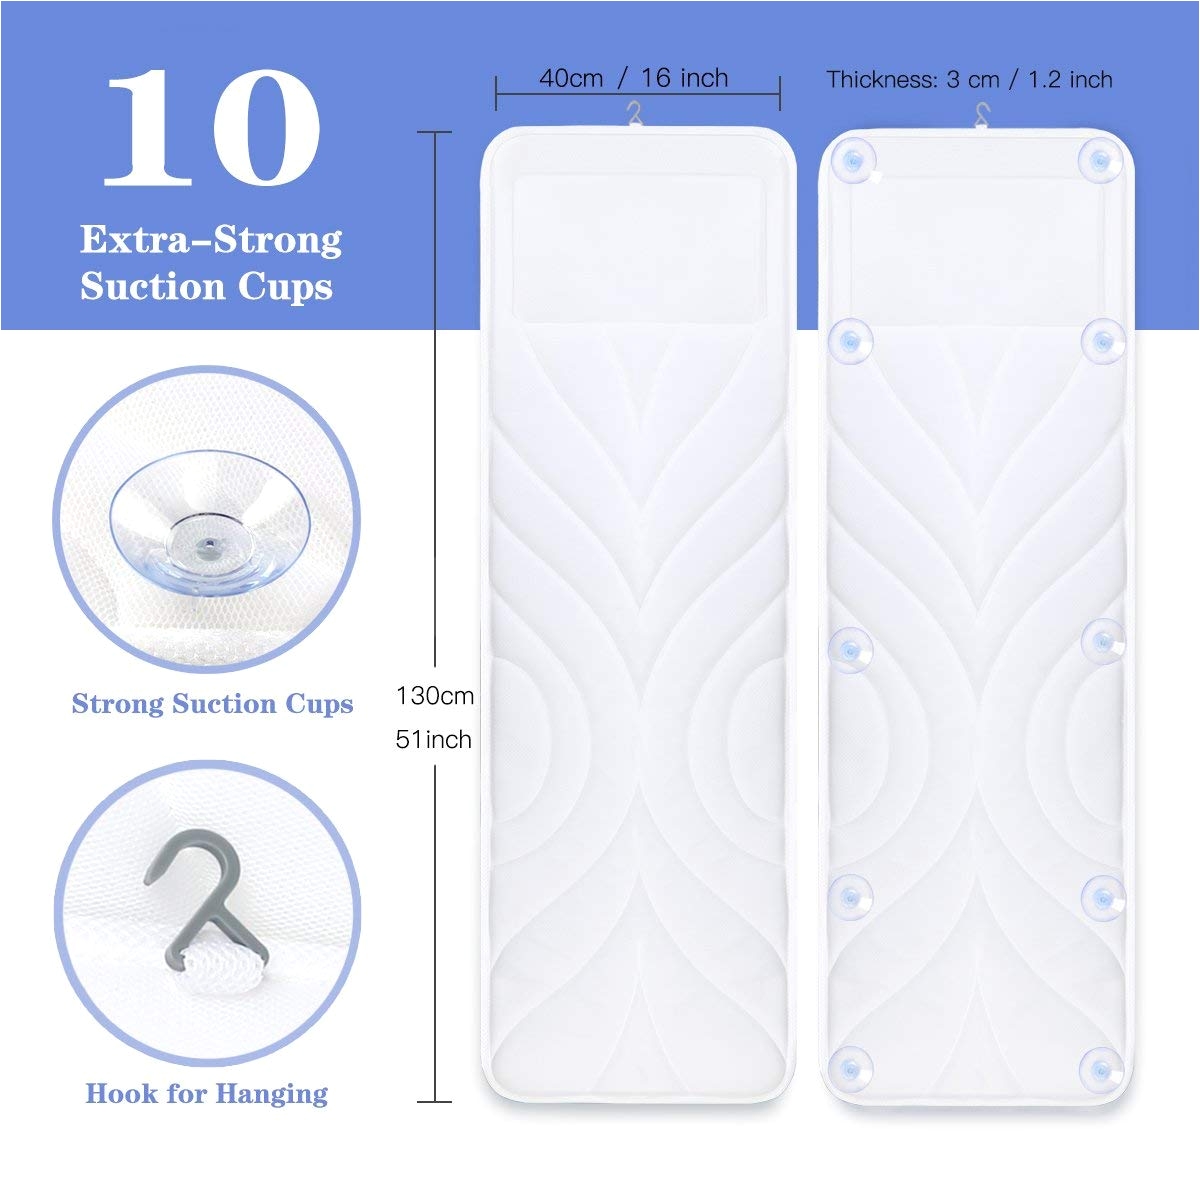 amazon com full body bath mat pillow luxury spa cushion bathtub mat with extra large non slip suction cups neck shoulder tailbone support quick dry